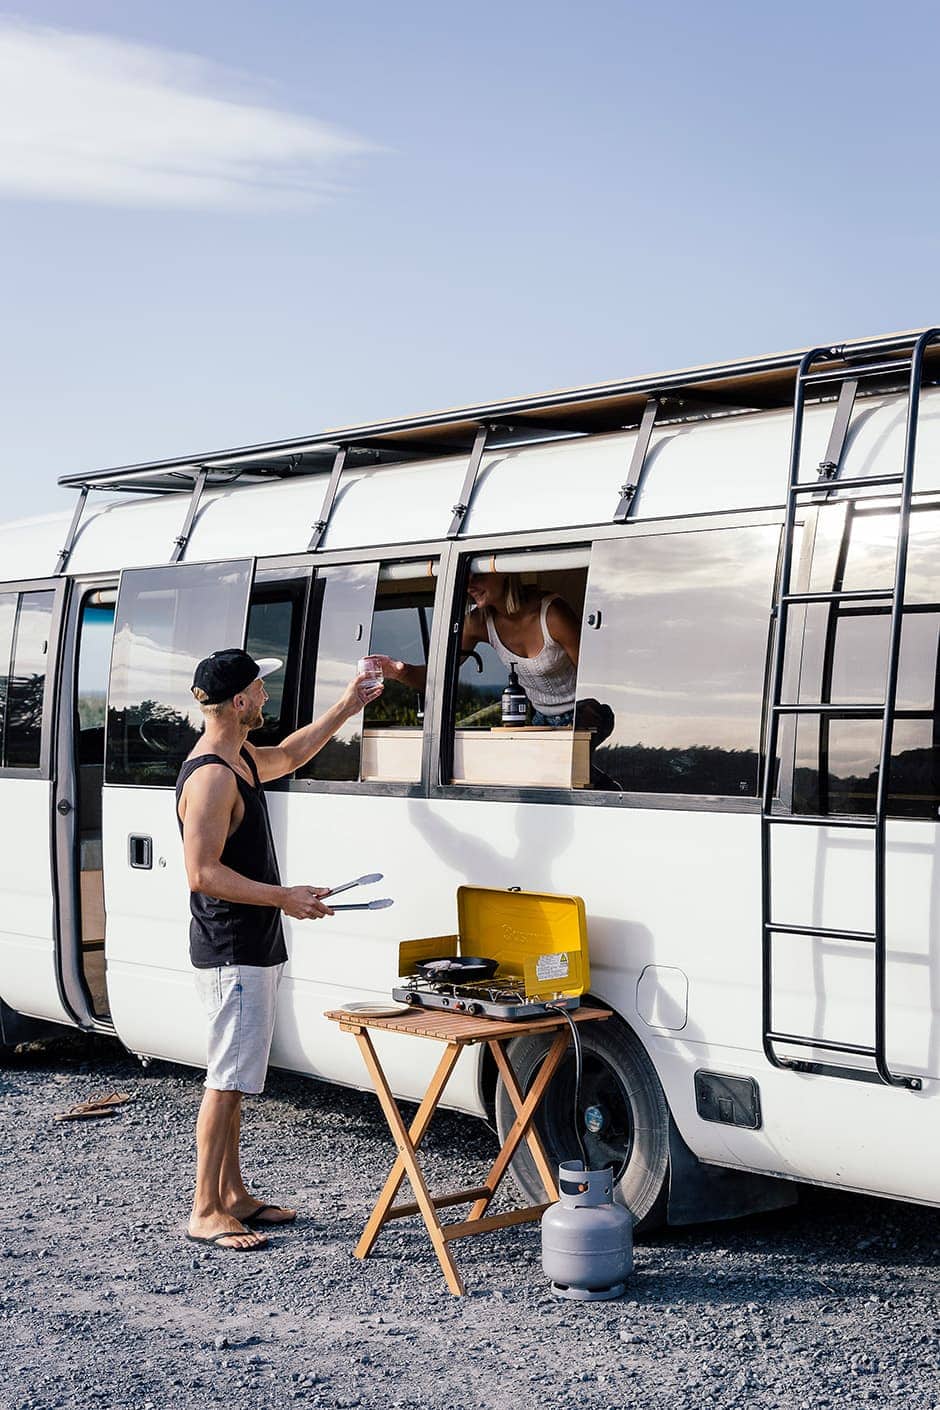 A Scandi-style surf van with a plan